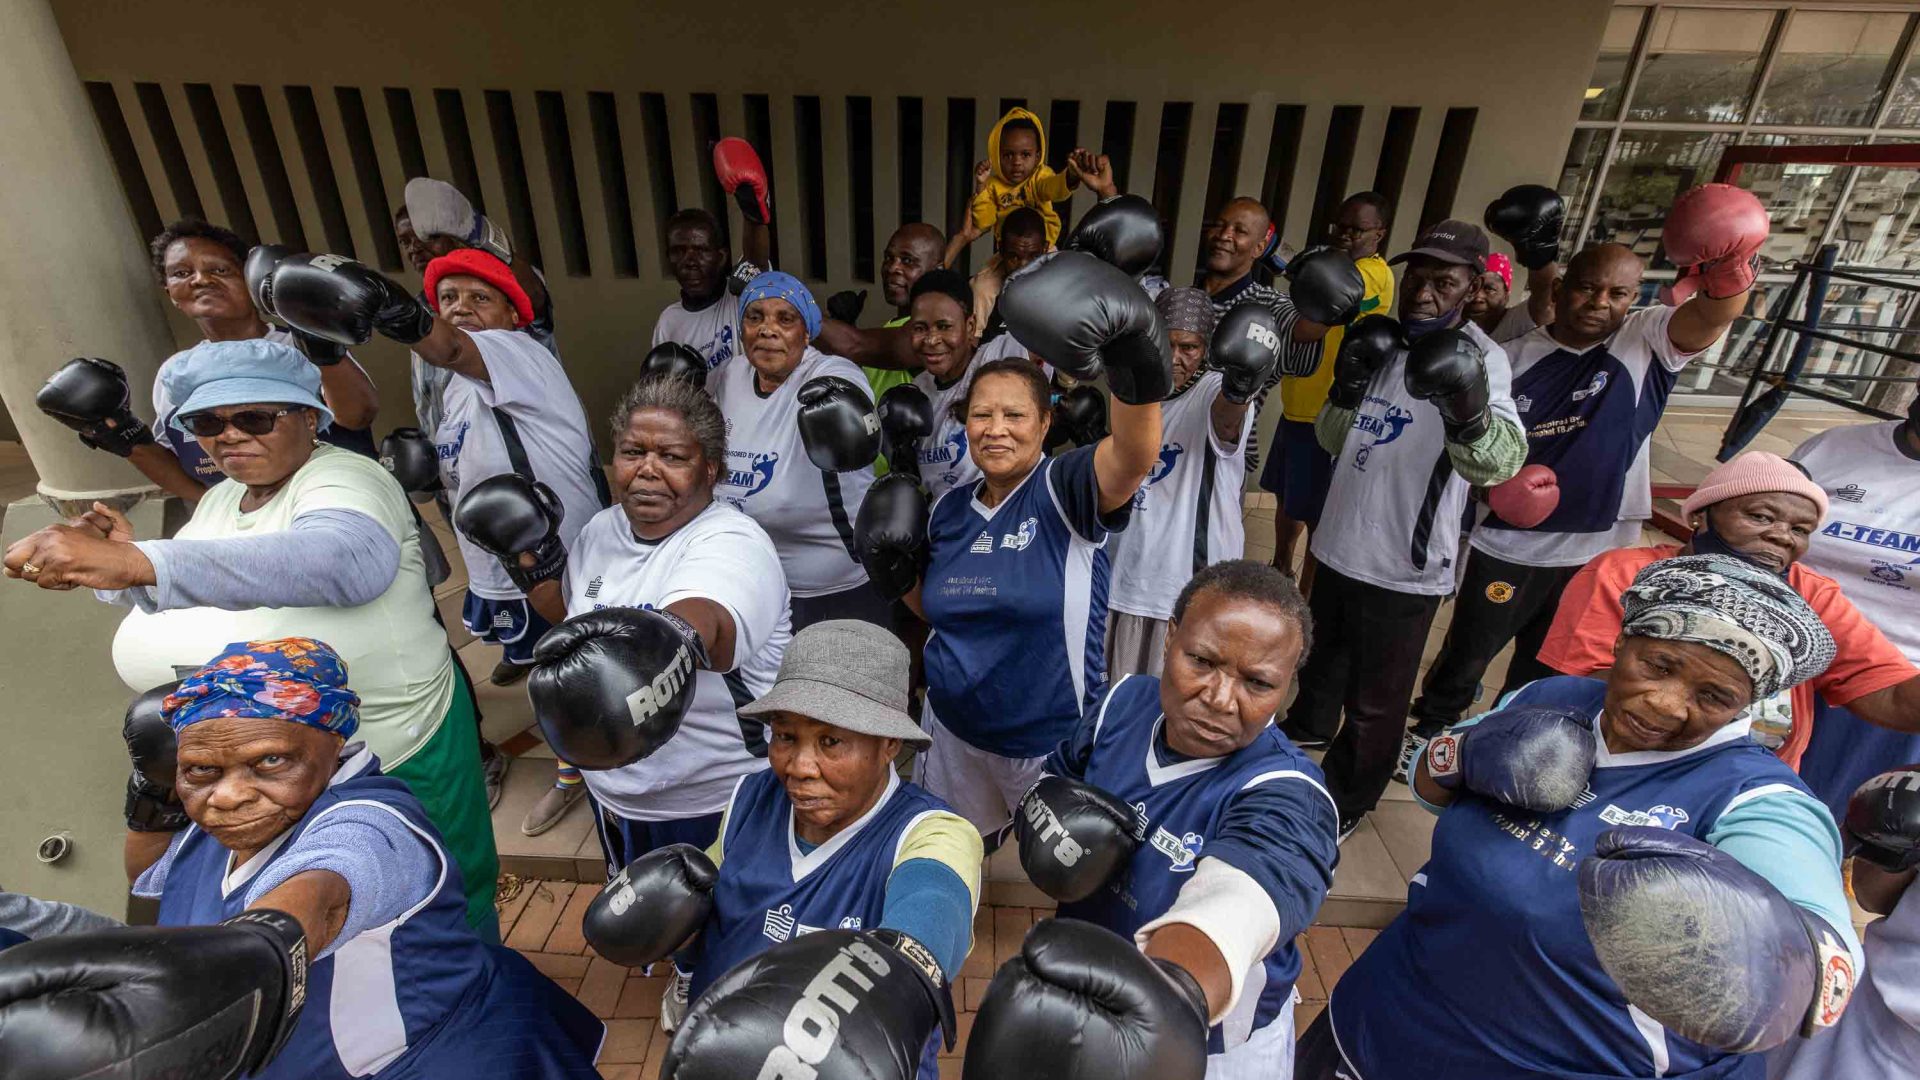 Members of boxing grannies raise their boxing gloves.